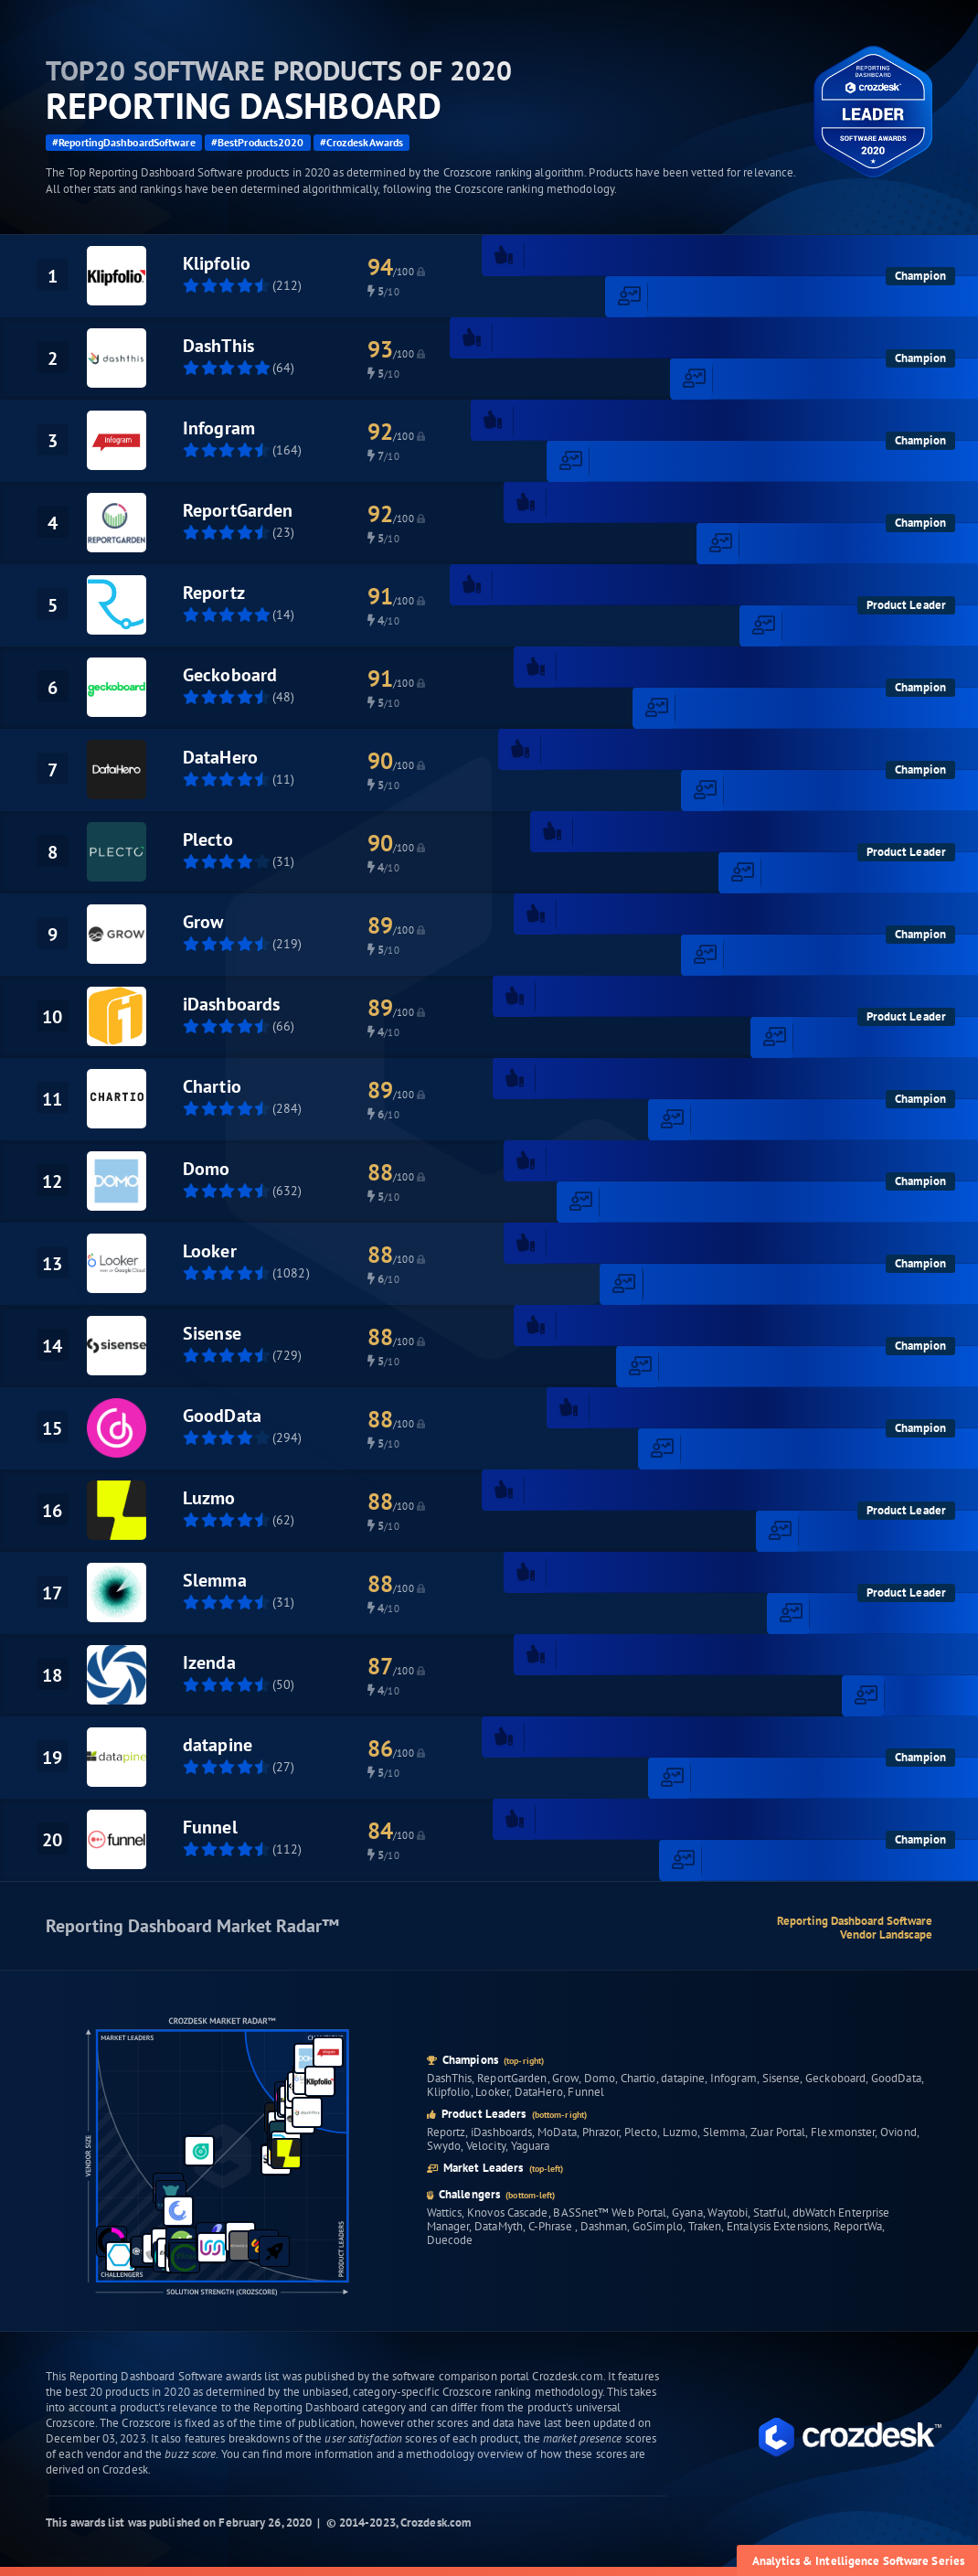 Top 20 Reporting Dashboard Software of 2020 Infographic